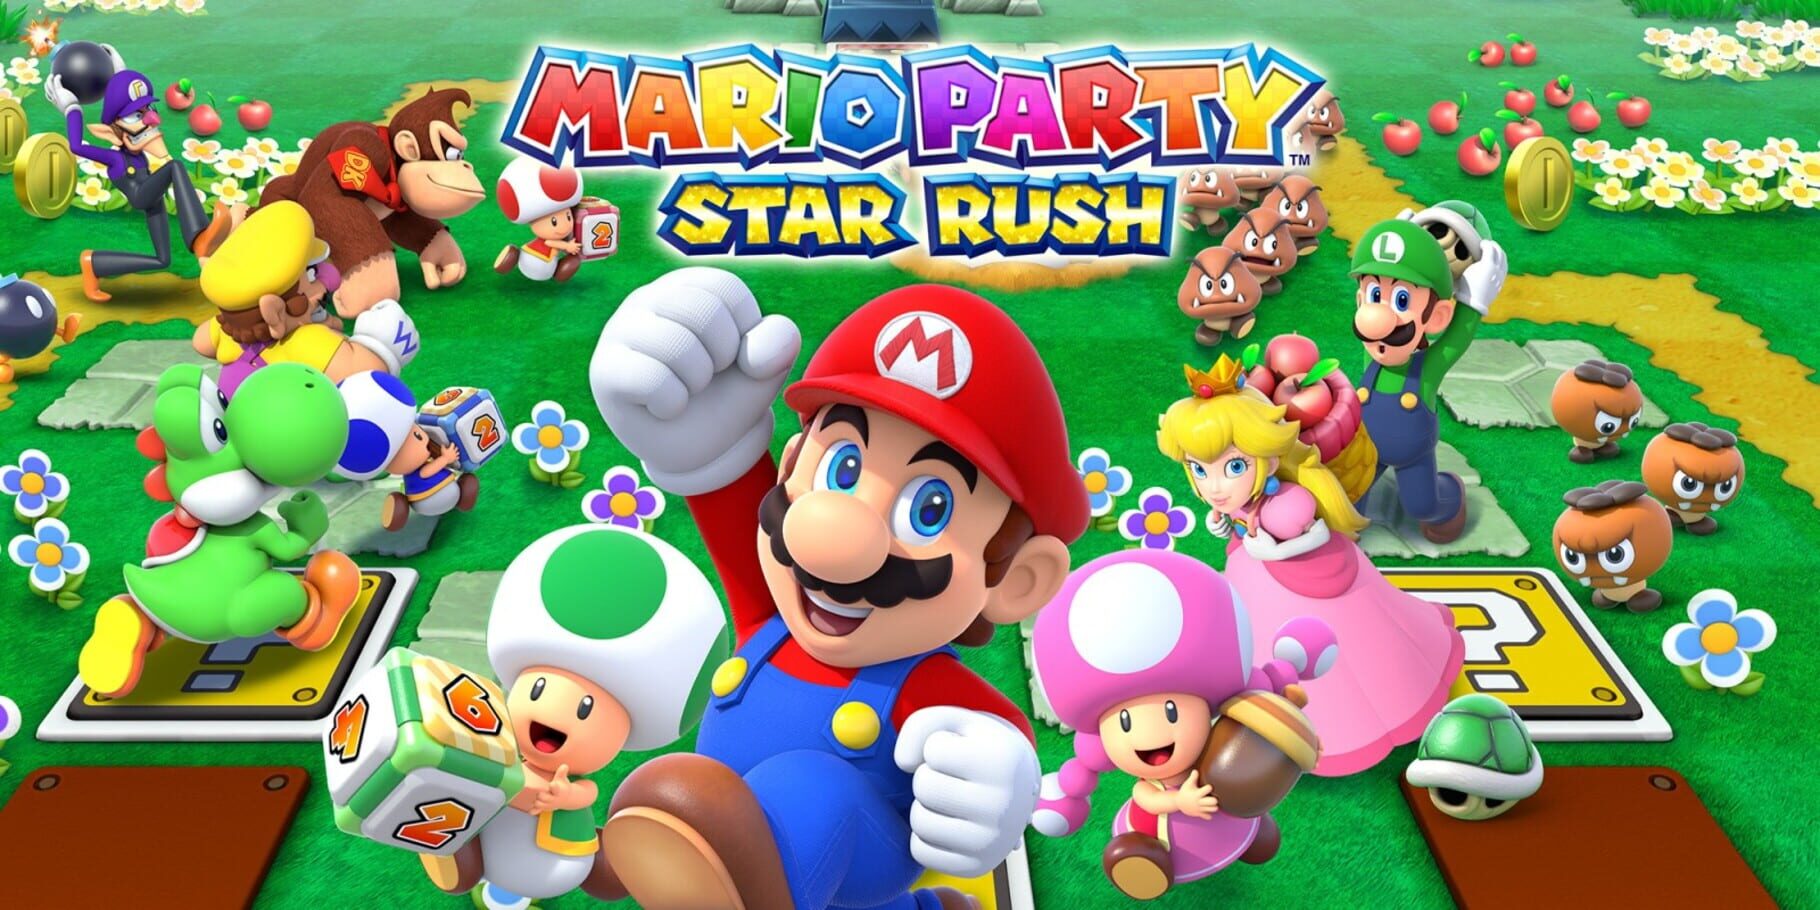 Artwork for Mario Party: Star Rush